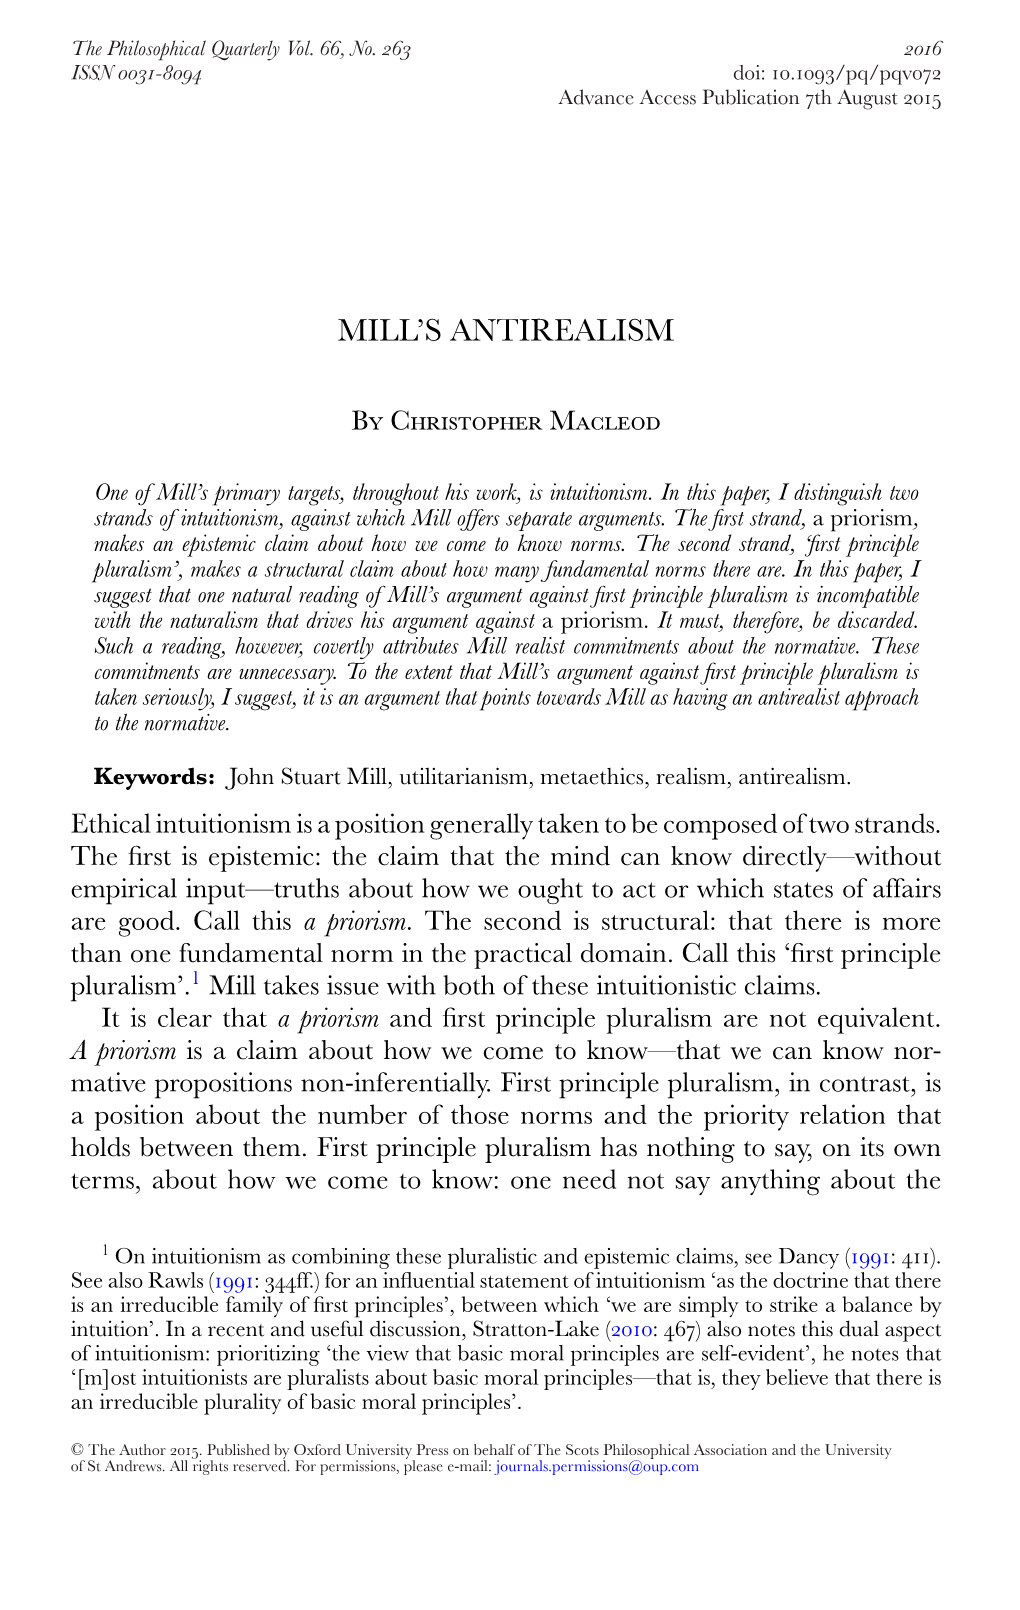 Mill's Antirealism